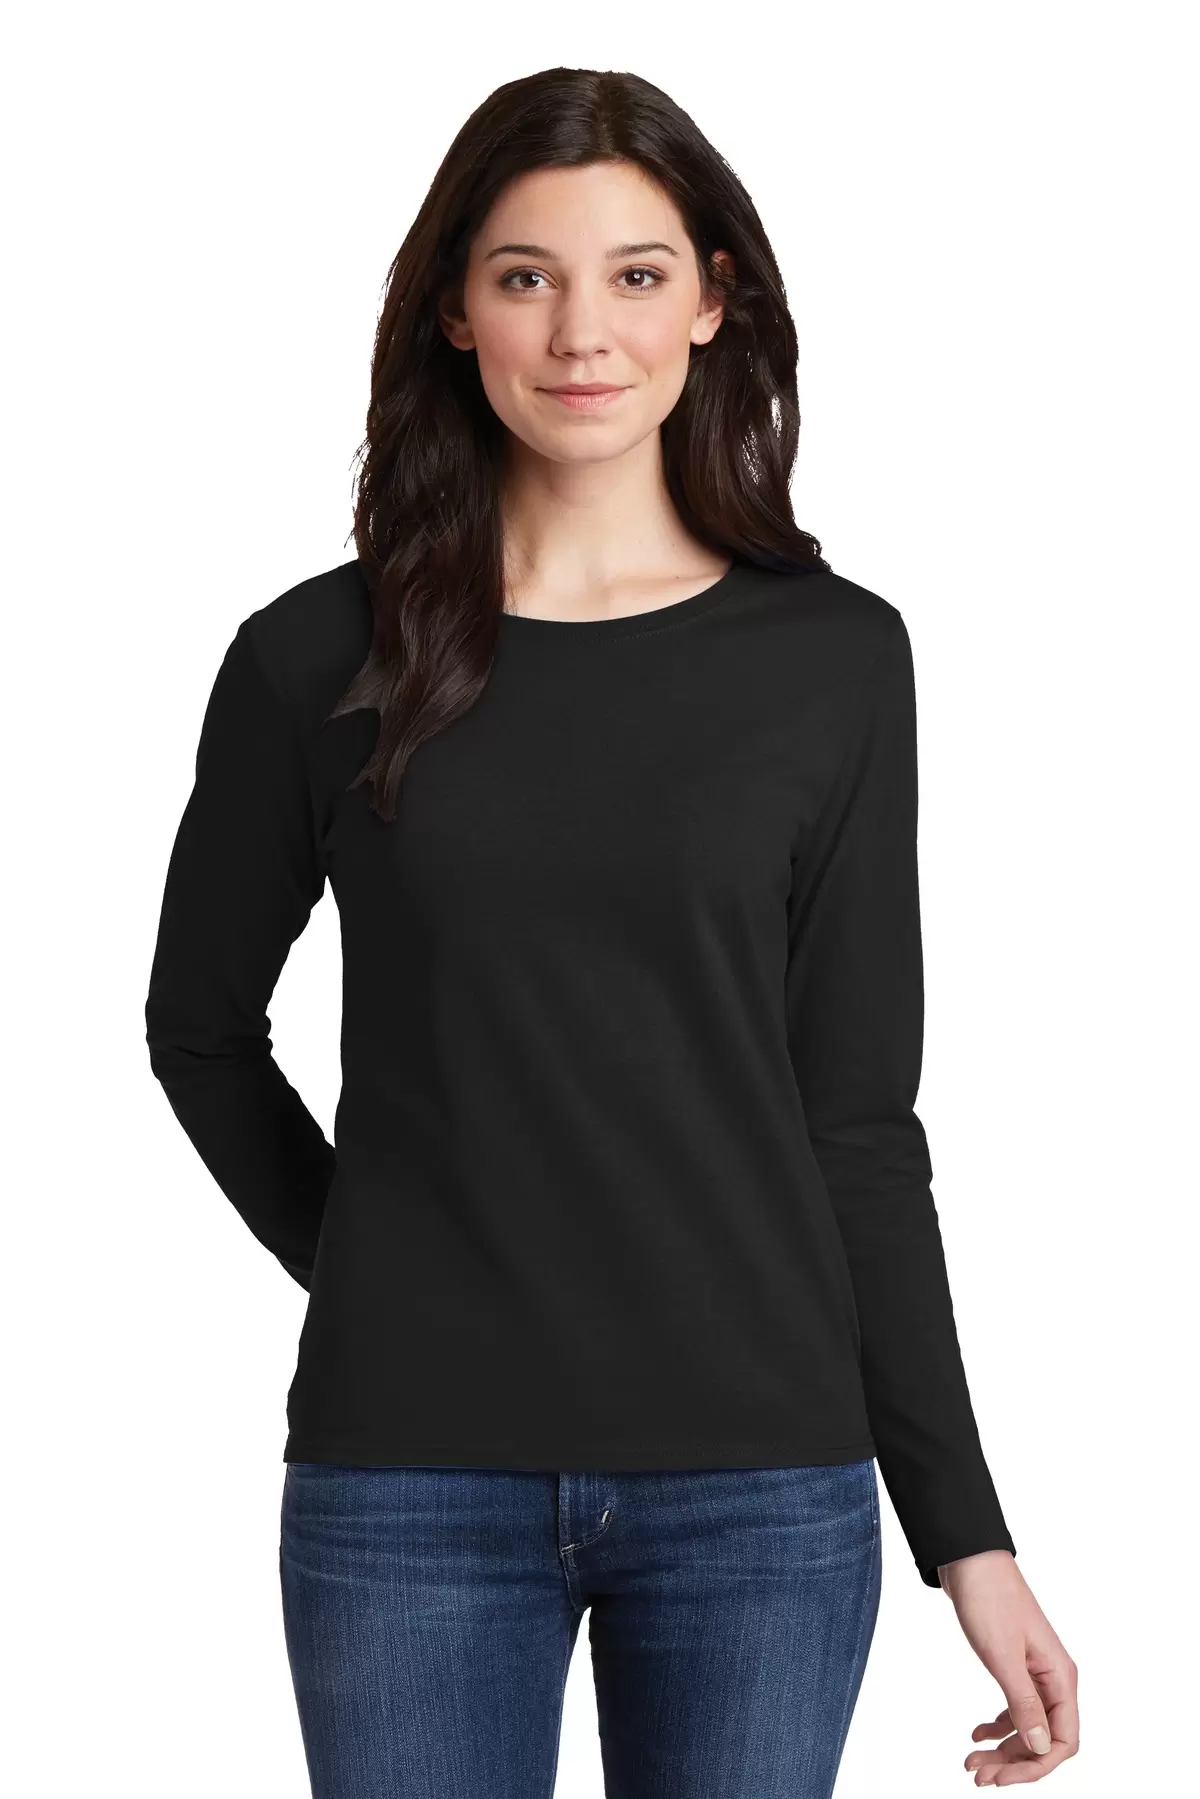 5400L Gildan Missy Fit Heavy Cotton Fit Long-Sleeve T-Shirt - From $5.52